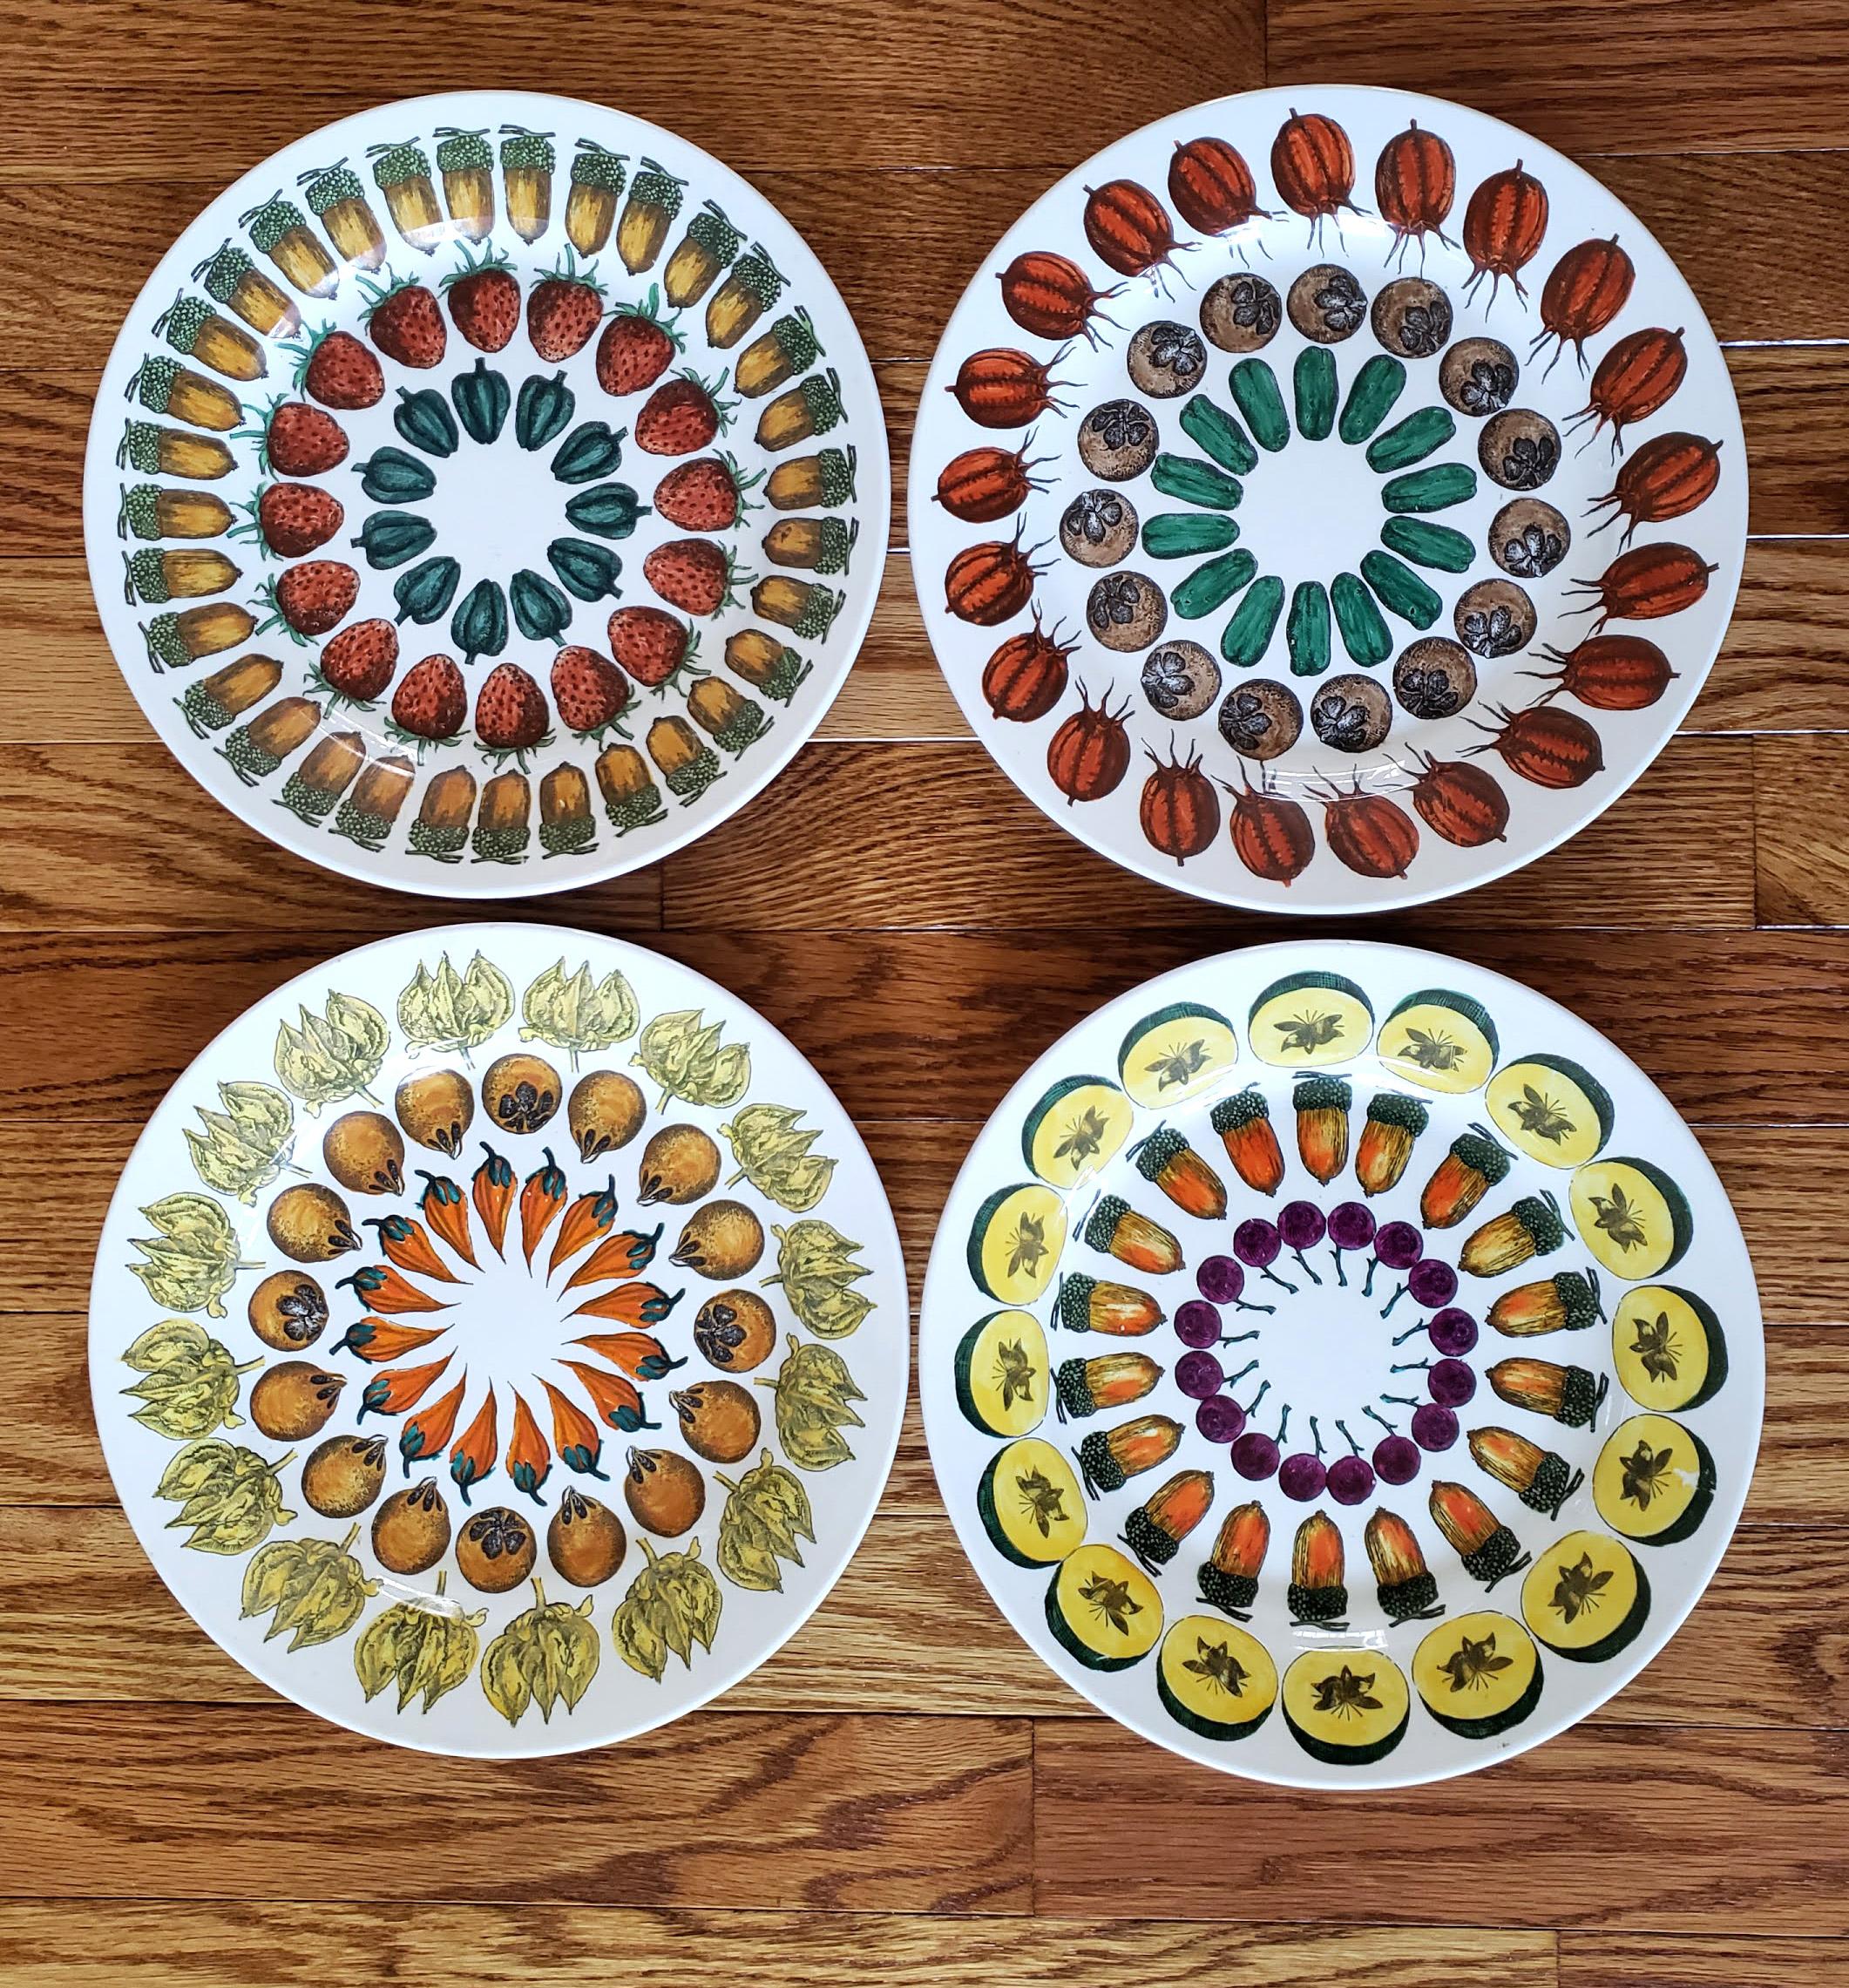 Remarkable Rare Set of Four Piero Fornasetti Giostra di Frutta Pattern Pottery Plates,
Porcelain dated 1955,
1950s.

The pattern 